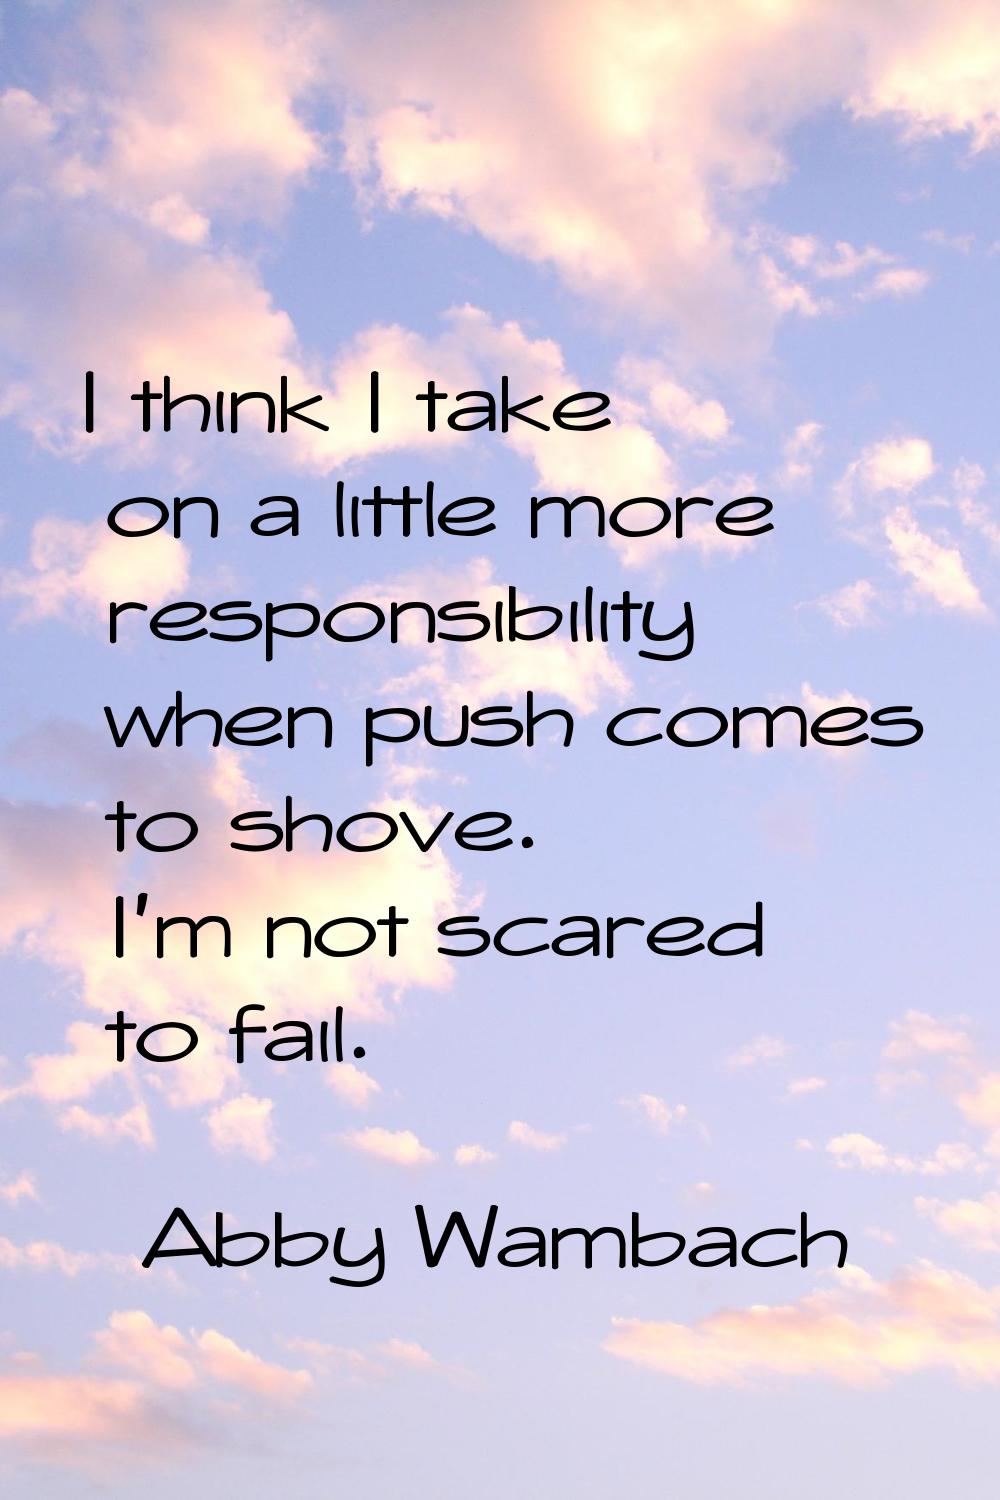 I think I take on a little more responsibility when push comes to shove. I'm not scared to fail.